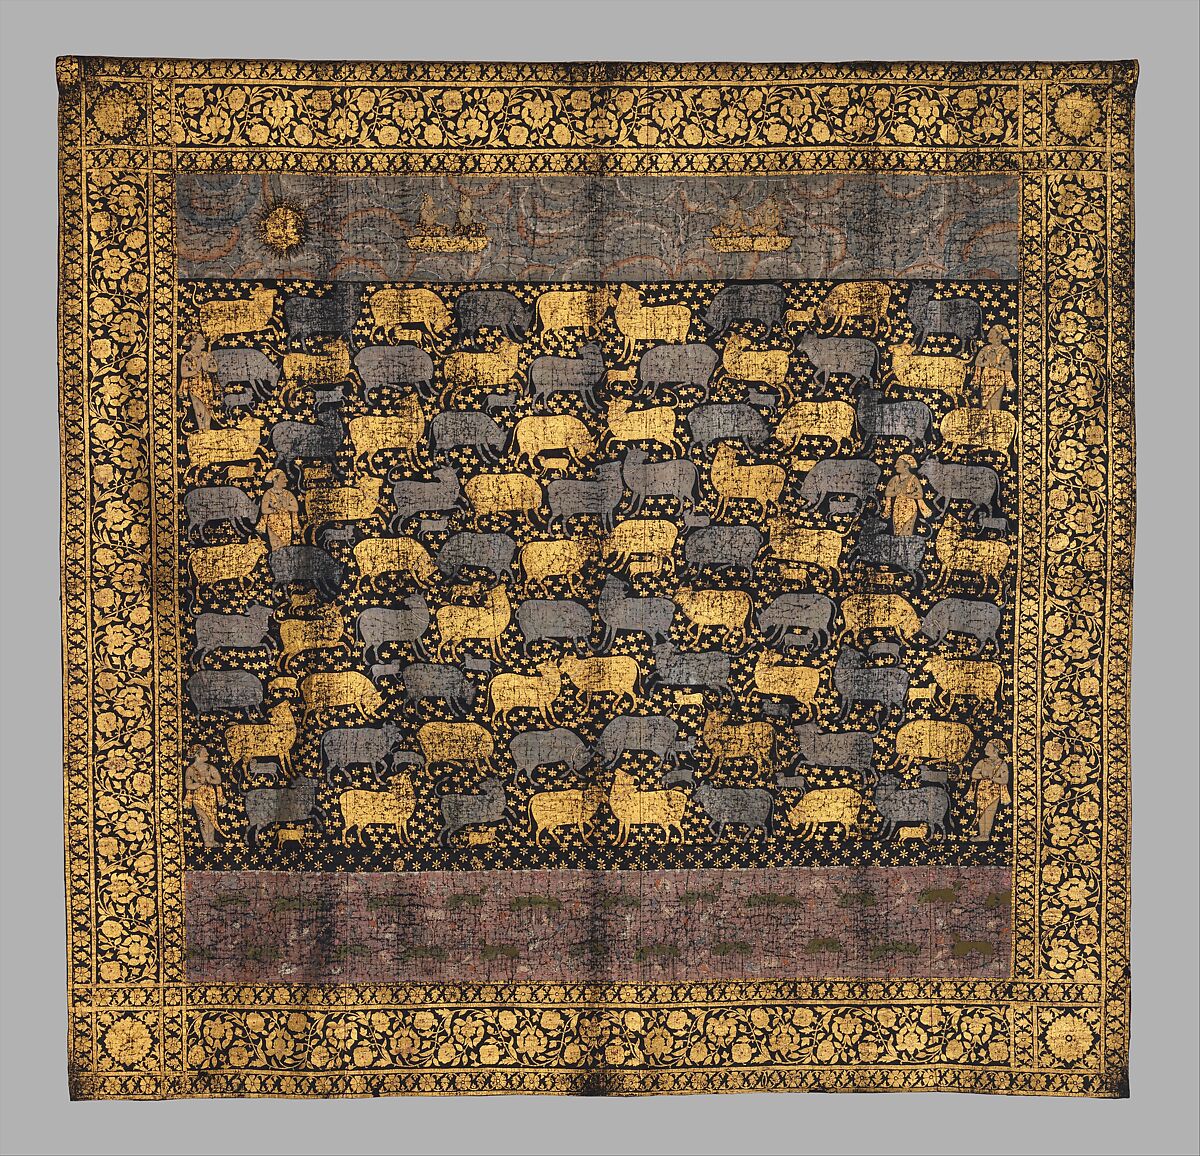 Pichhwai for the Festival of Cows, Painted and printed gold and silver leaf and opaque watercolor on indigo-dyed cotton, India, Deccan, Aurangabad (?) 